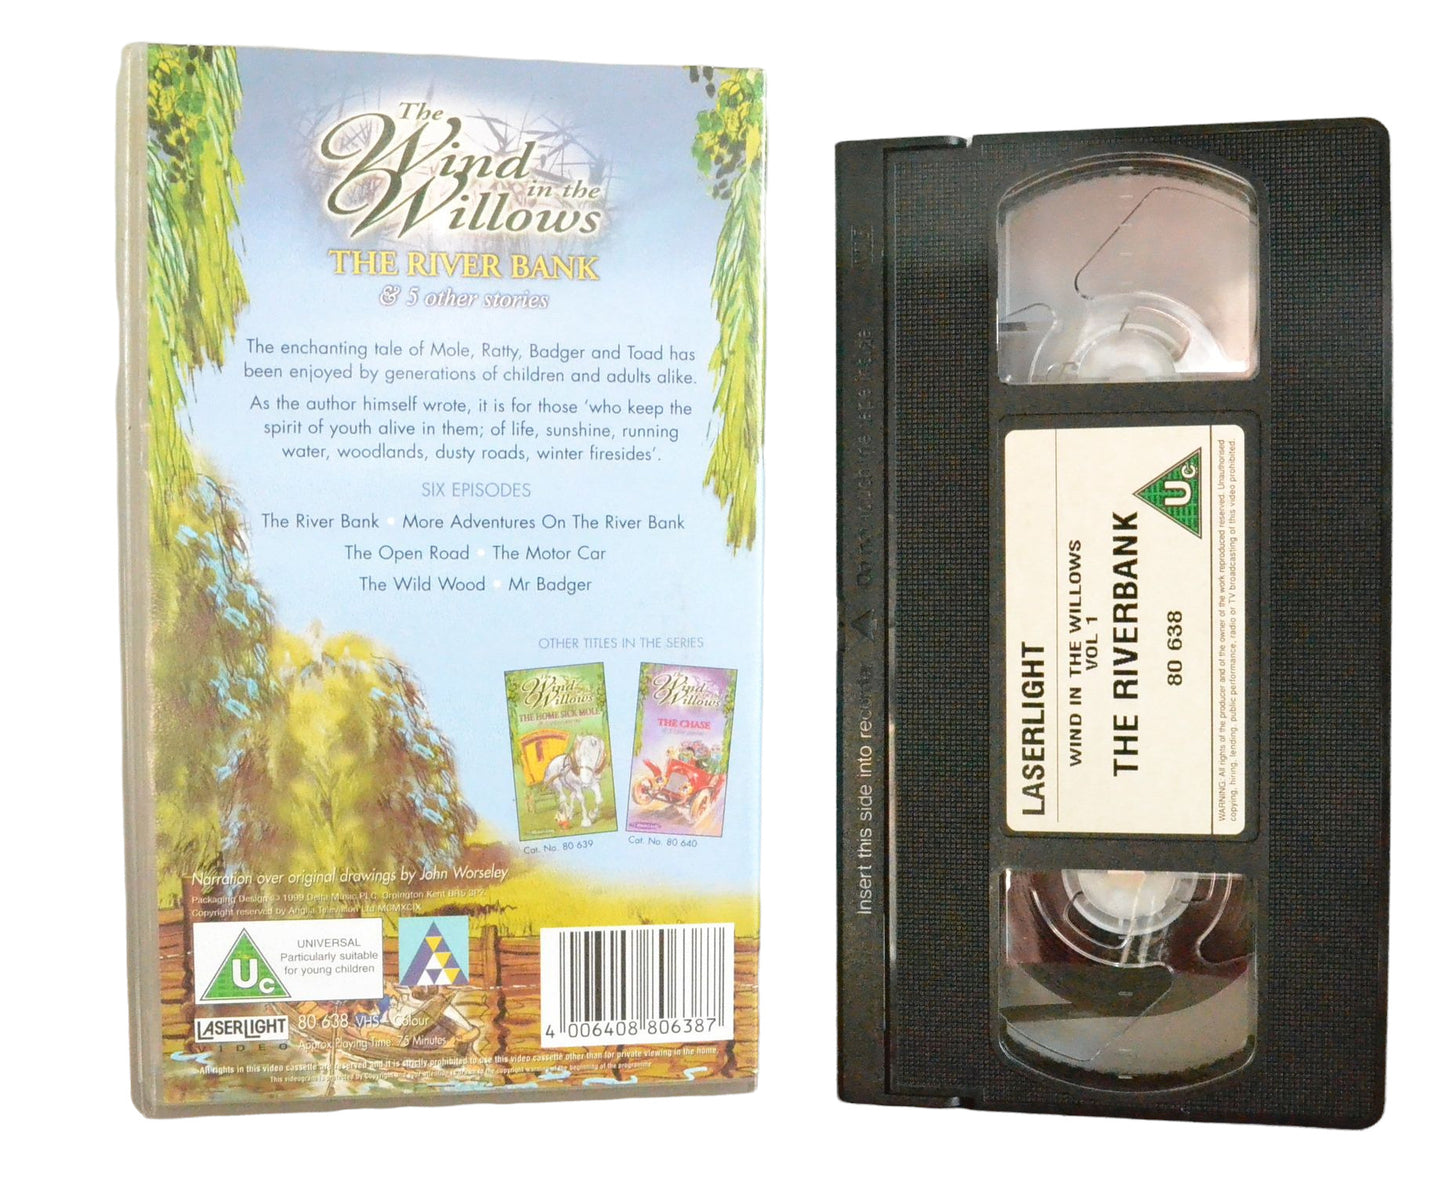 The Wind In The Willows (The River Bank & 5 Other Stories) - LaserLight Video - Children's - Pal VHS-